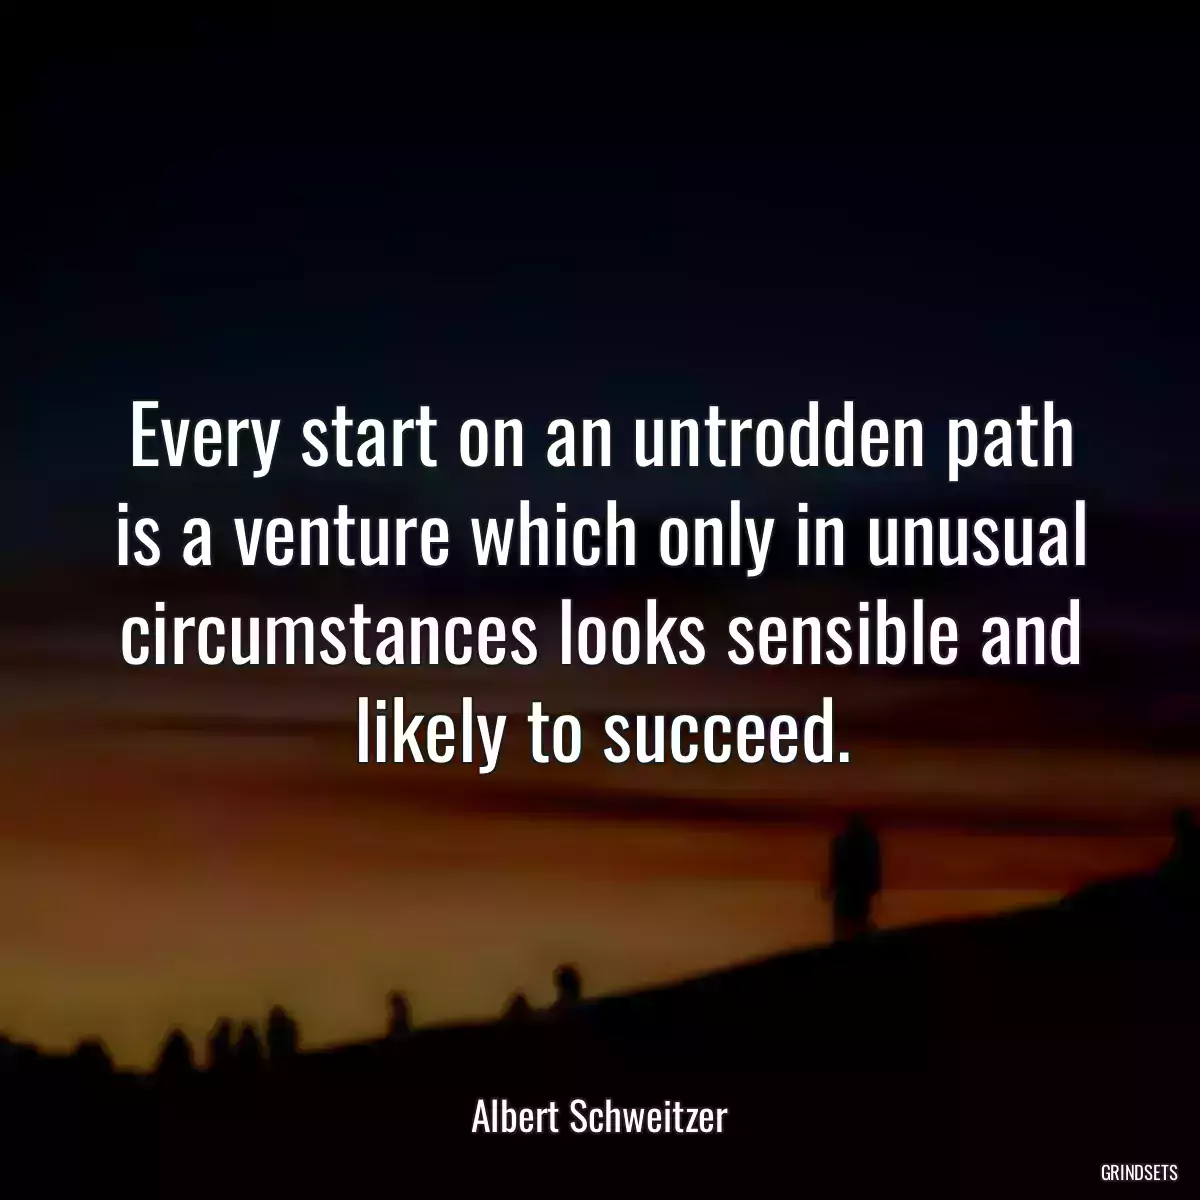 Every start on an untrodden path is a venture which only in unusual circumstances looks sensible and likely to succeed.